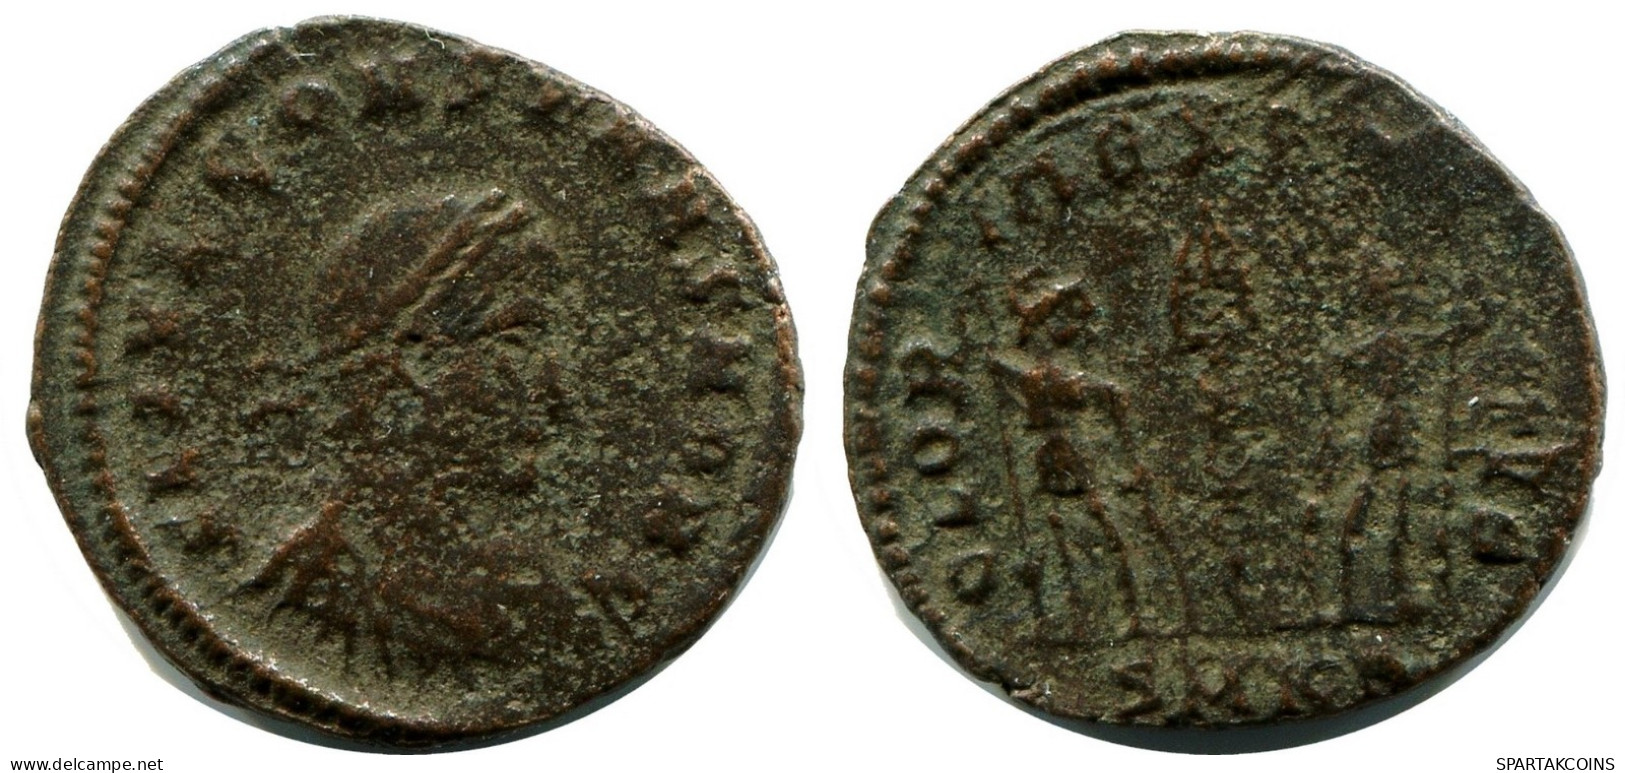 CONSTANS MINTED IN CYZICUS FROM THE ROYAL ONTARIO MUSEUM #ANC11602.14.D.A - L'Empire Chrétien (307 à 363)